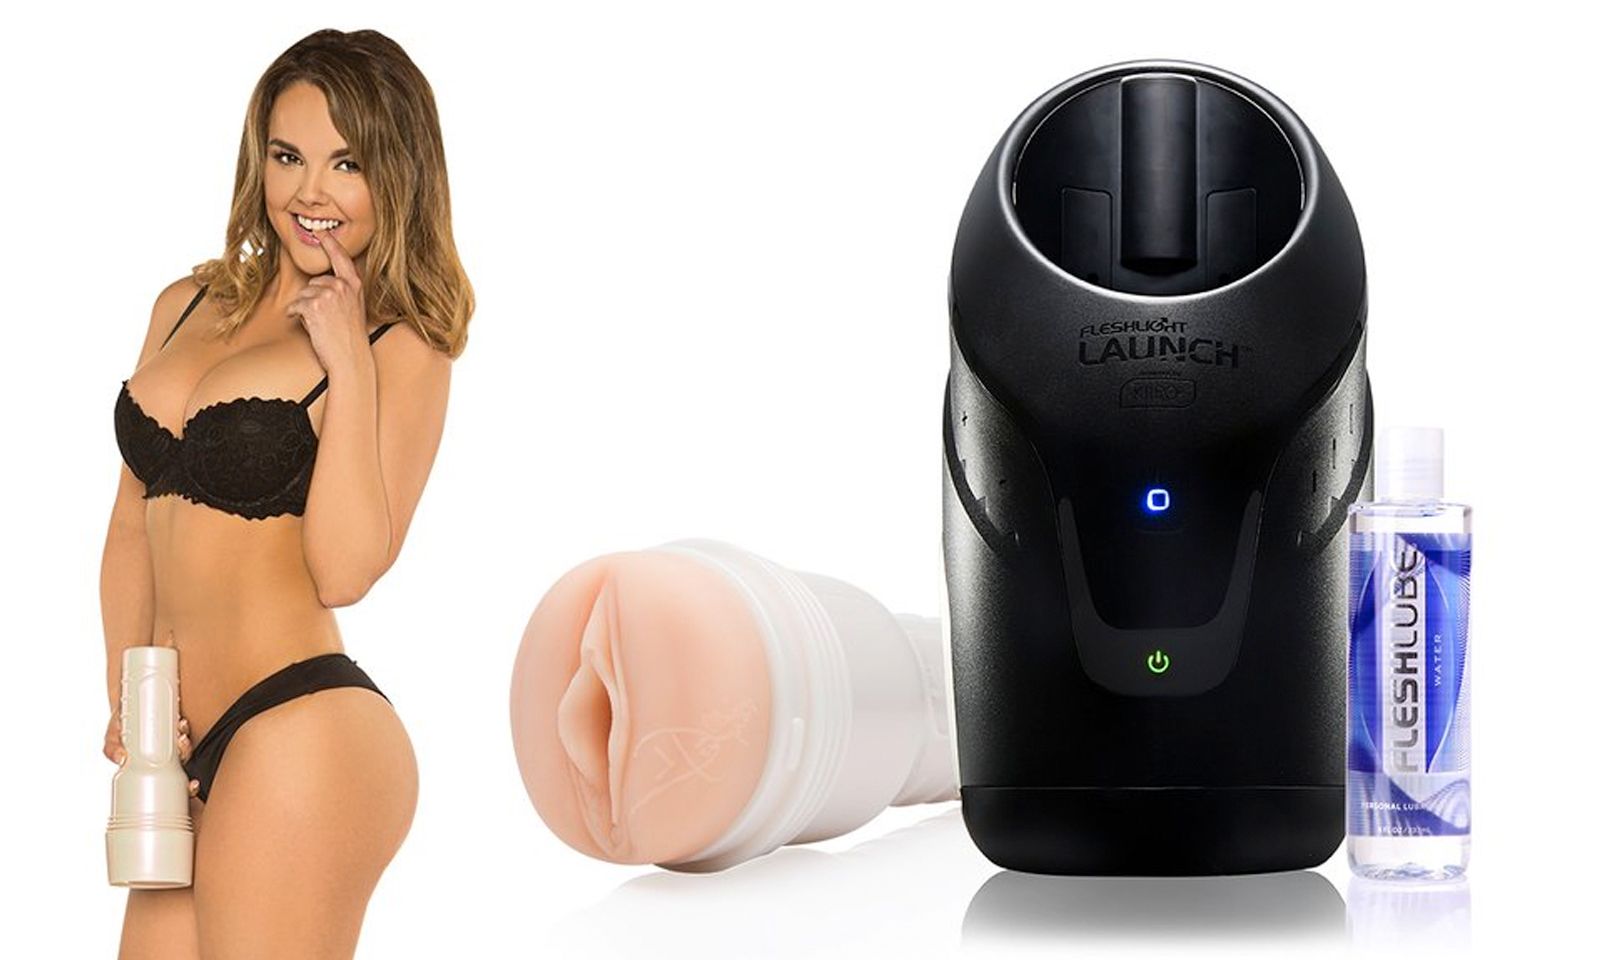 Fans Can Get Interactive With Dillion Harper , Fleshlight Launch